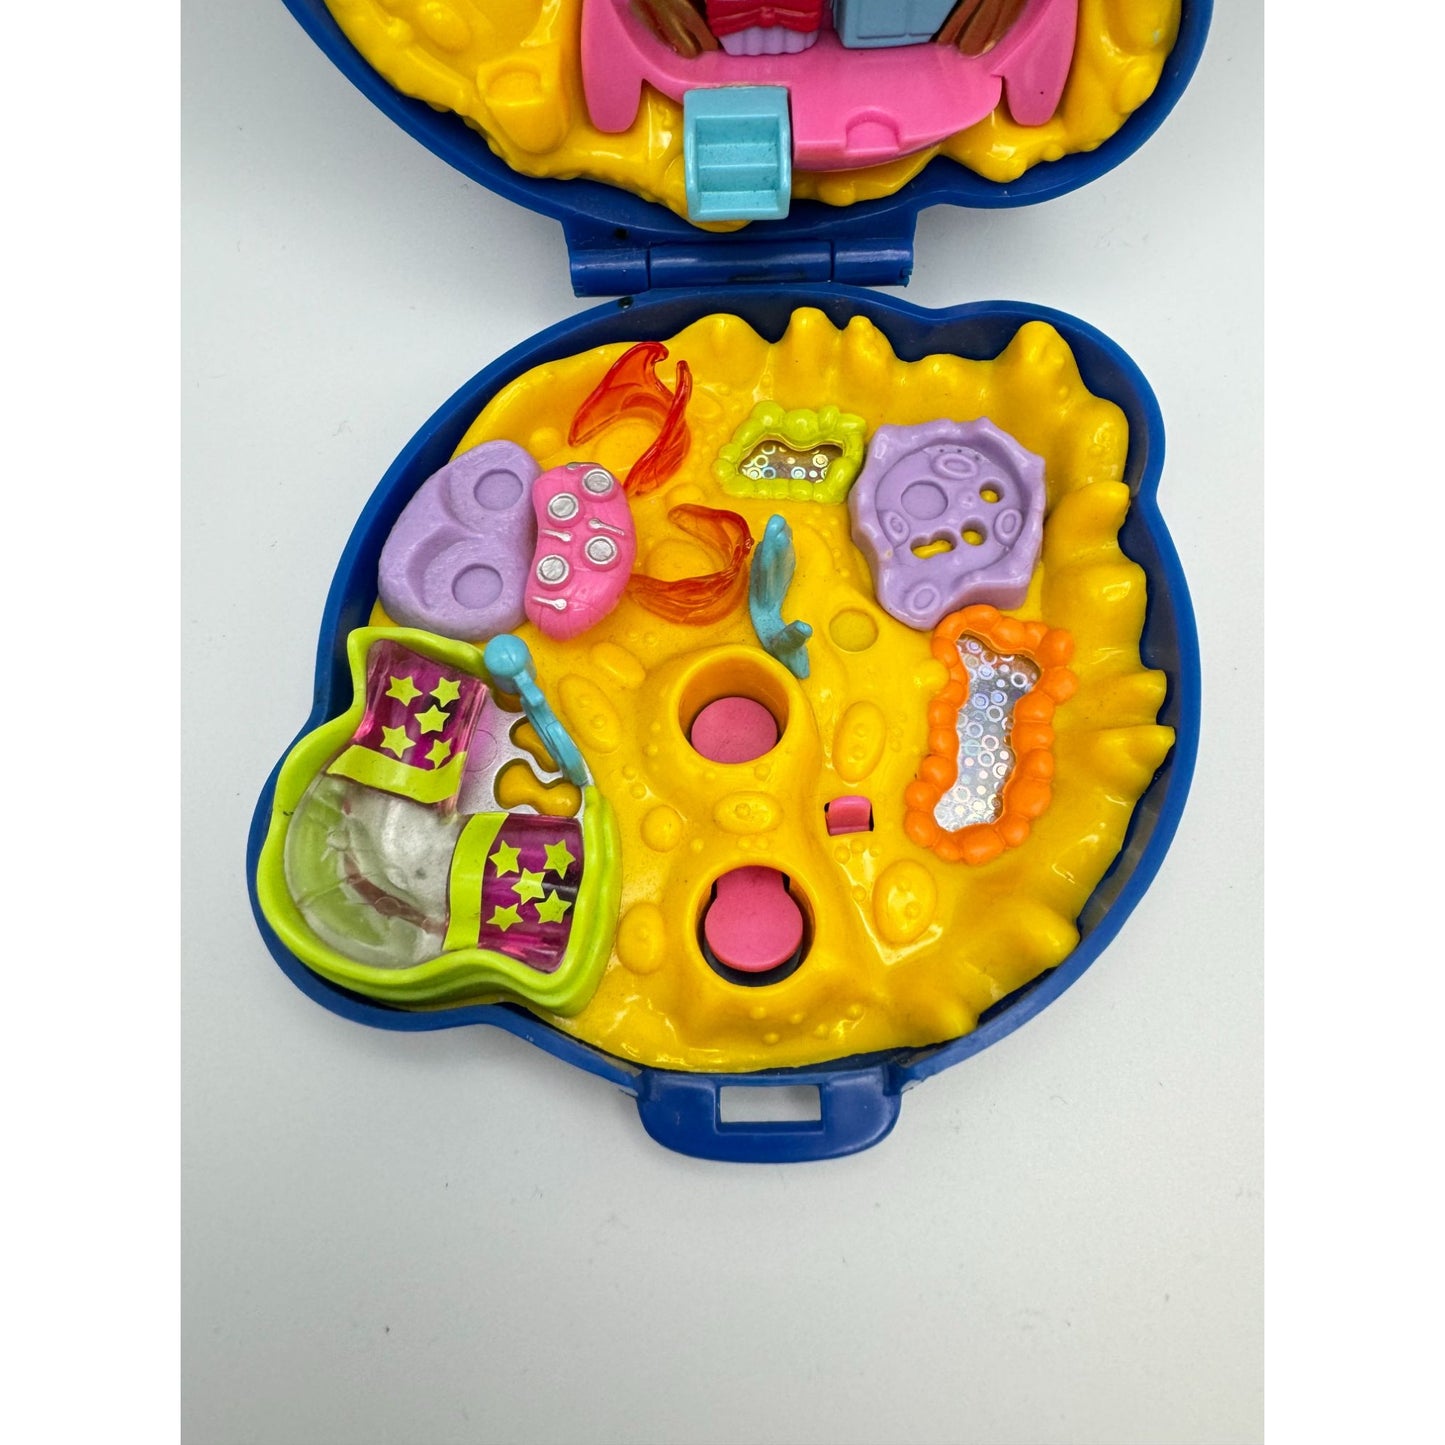 1996 Polly Pocket Minnie Mouse Playcase Compact ONLY